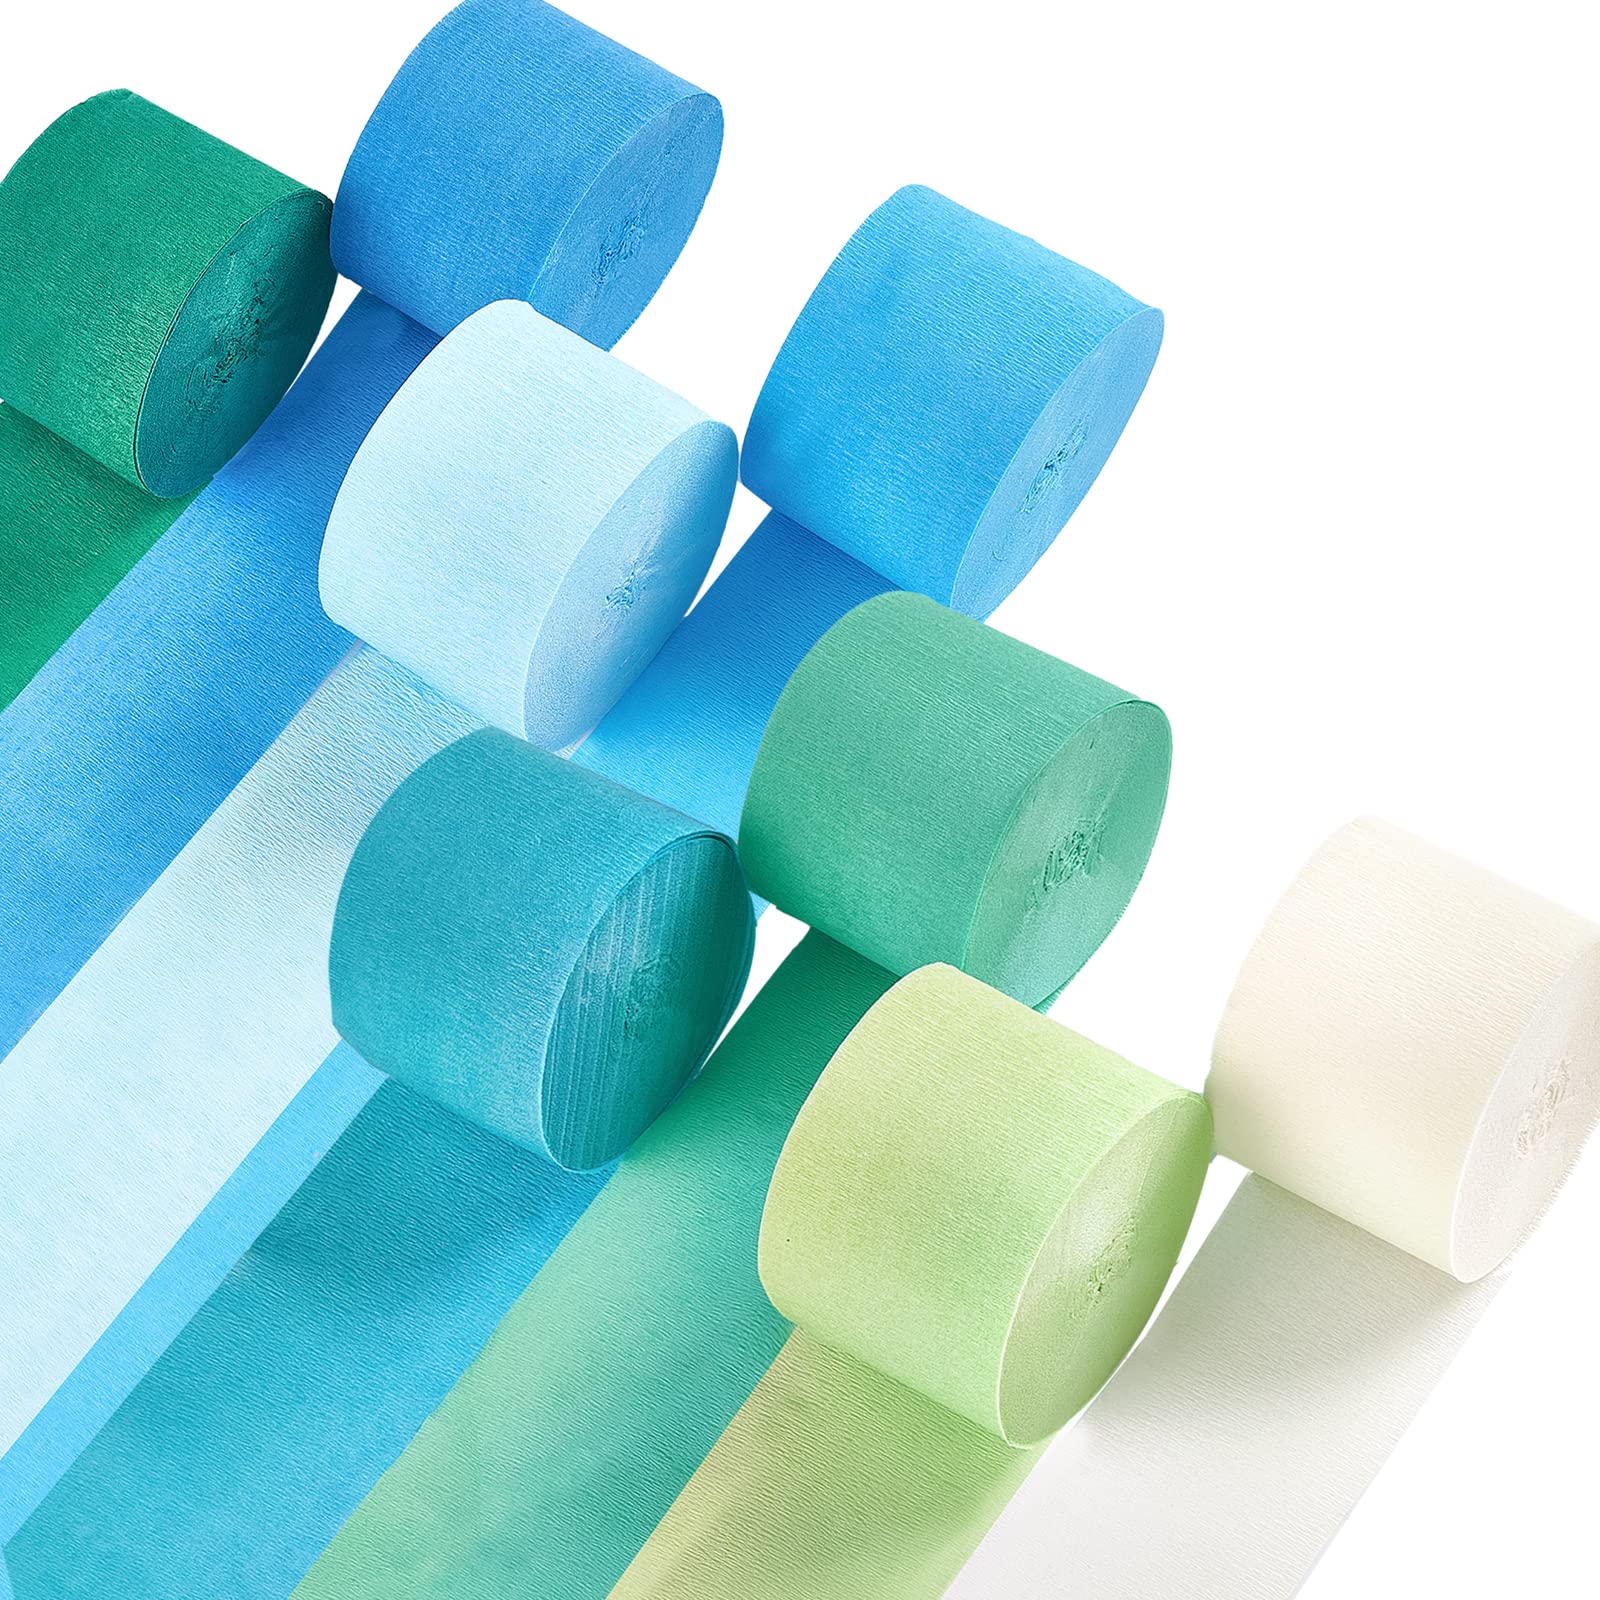 PartyWoo Crepe Paper Streamers 8 Rolls 656ft, Pack of Blue, Pastel Blue, Green, Lime and White Party Streamers for Birthday Decorations, Party Decorations, Wedding Decorations (1.8 Inch x 82 Ft/Roll)